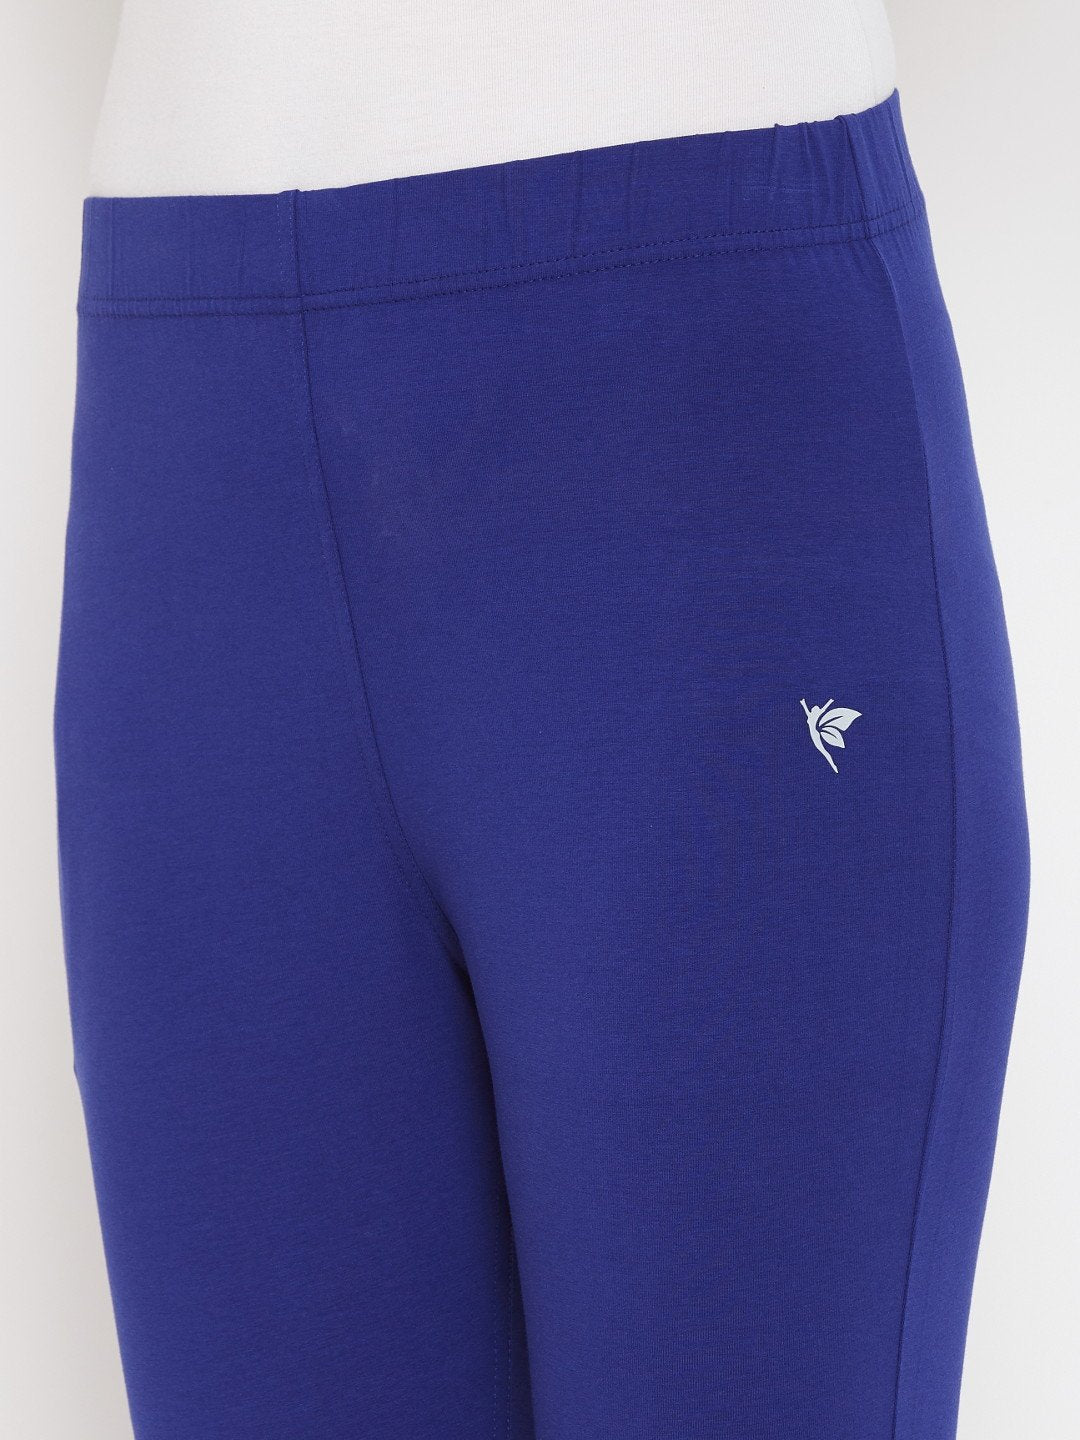 comfort lady blue straight pant 1 87eacfc5 3bf8 4a7d 861c